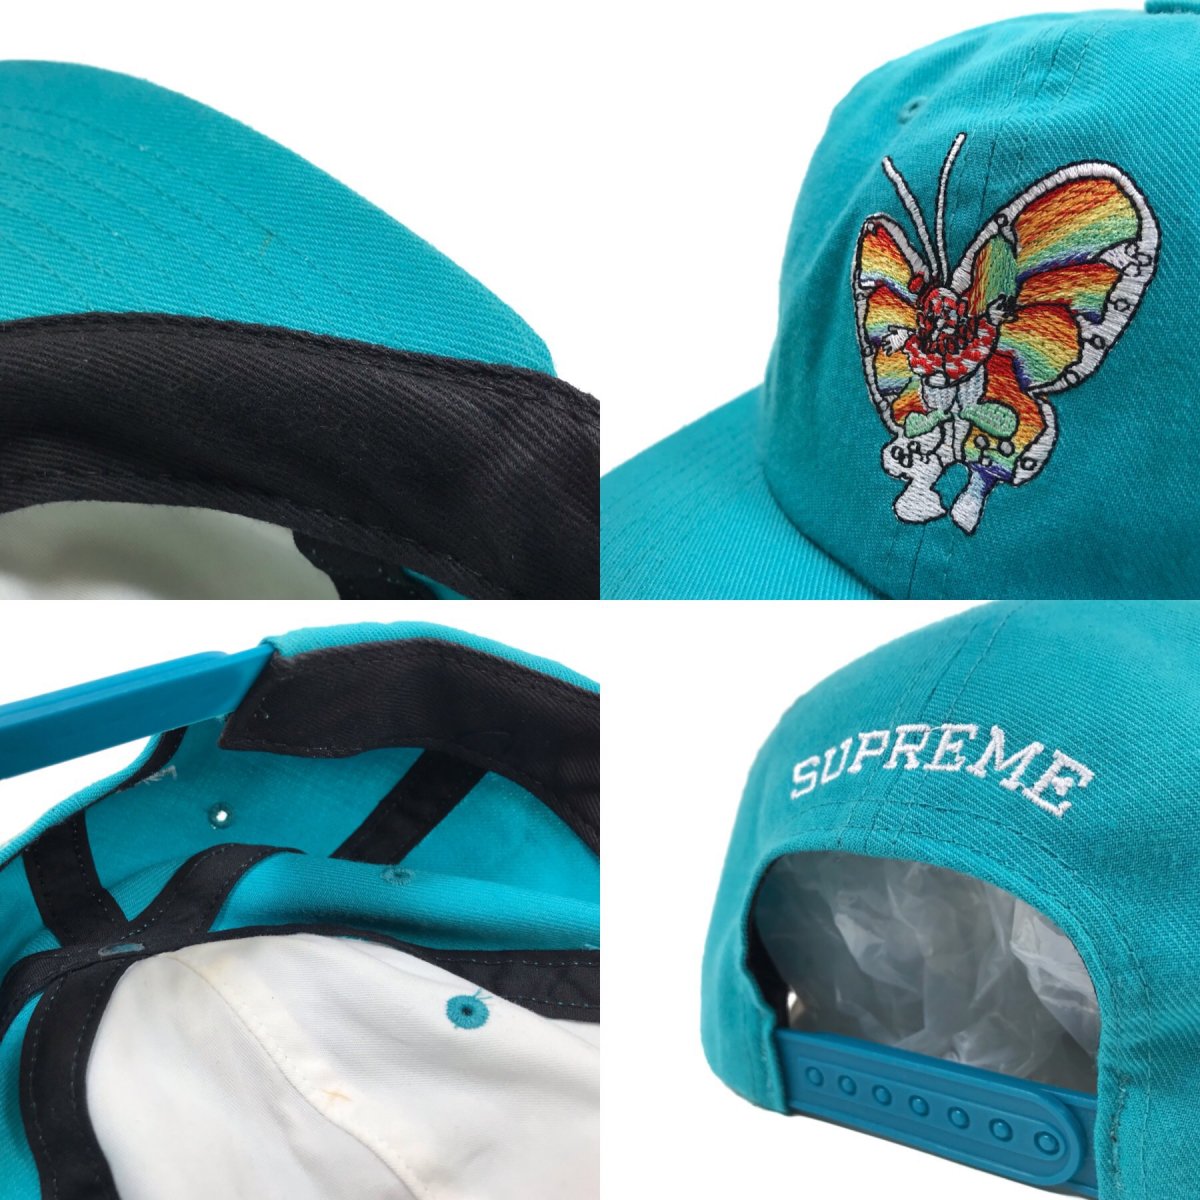 16SS SUPREME Gonz Butterfly 6-Panel Cap (Teal) シュプリーム マーク